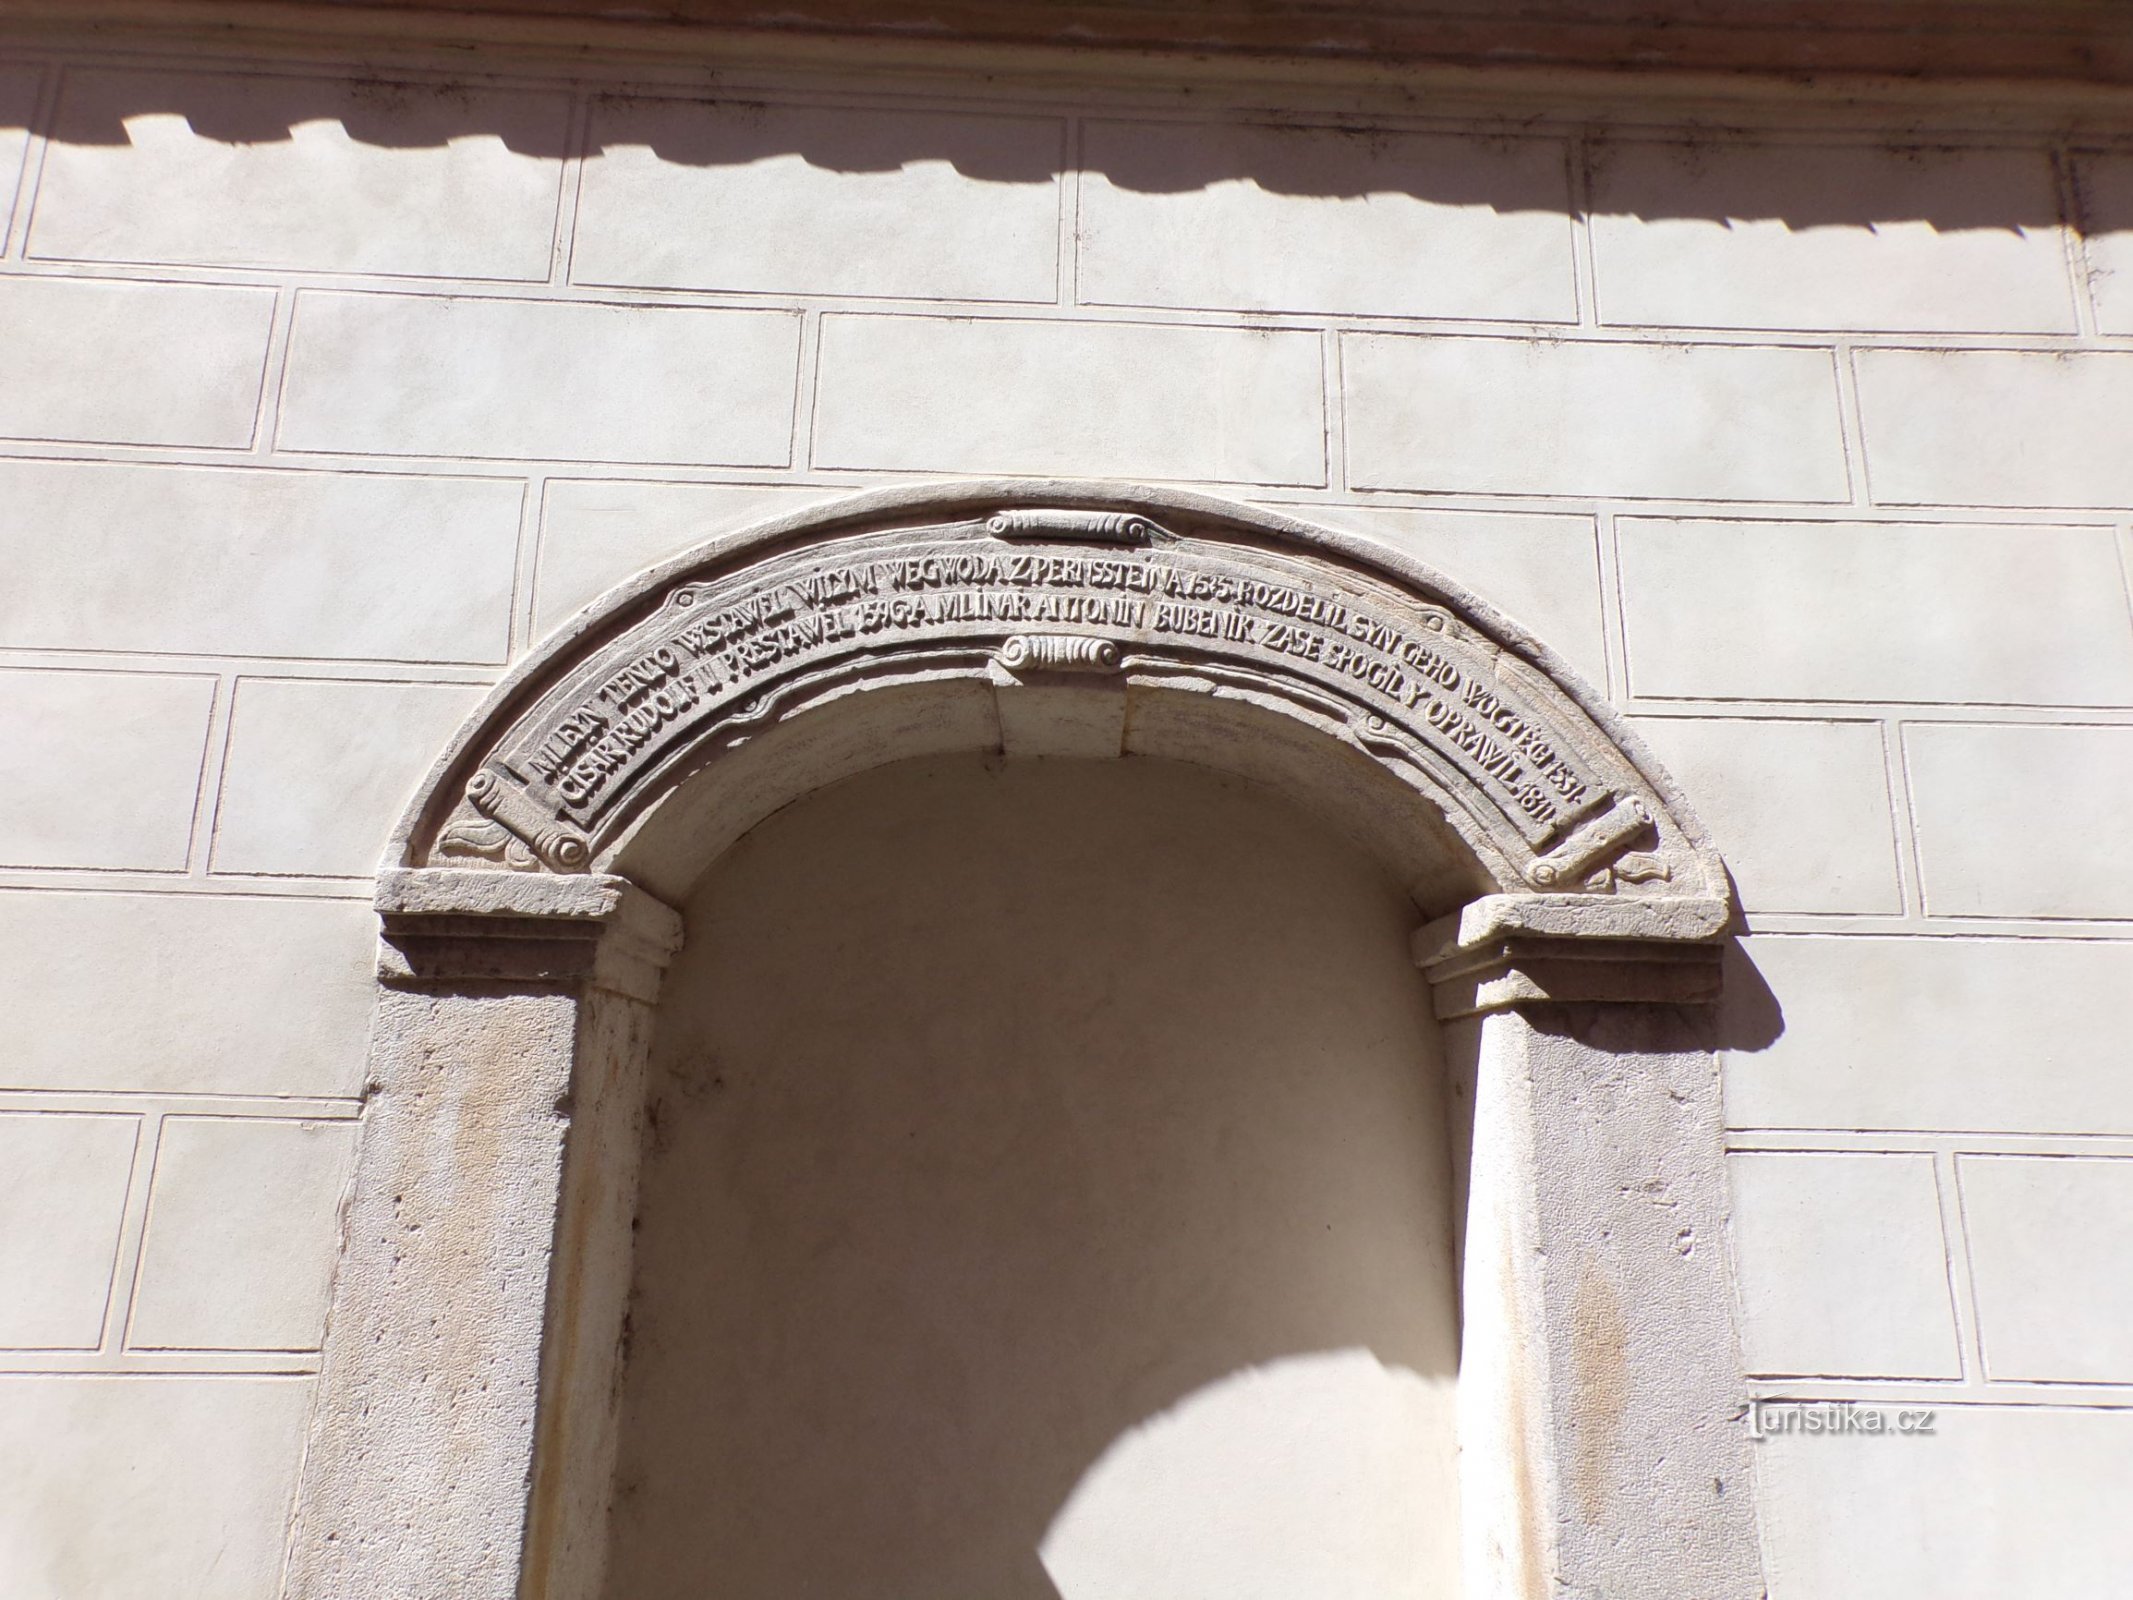 One of the cartouches on the wall of the former Imperial Mill (Pardubice, 10.5.2021/XNUMX/XNUMX)